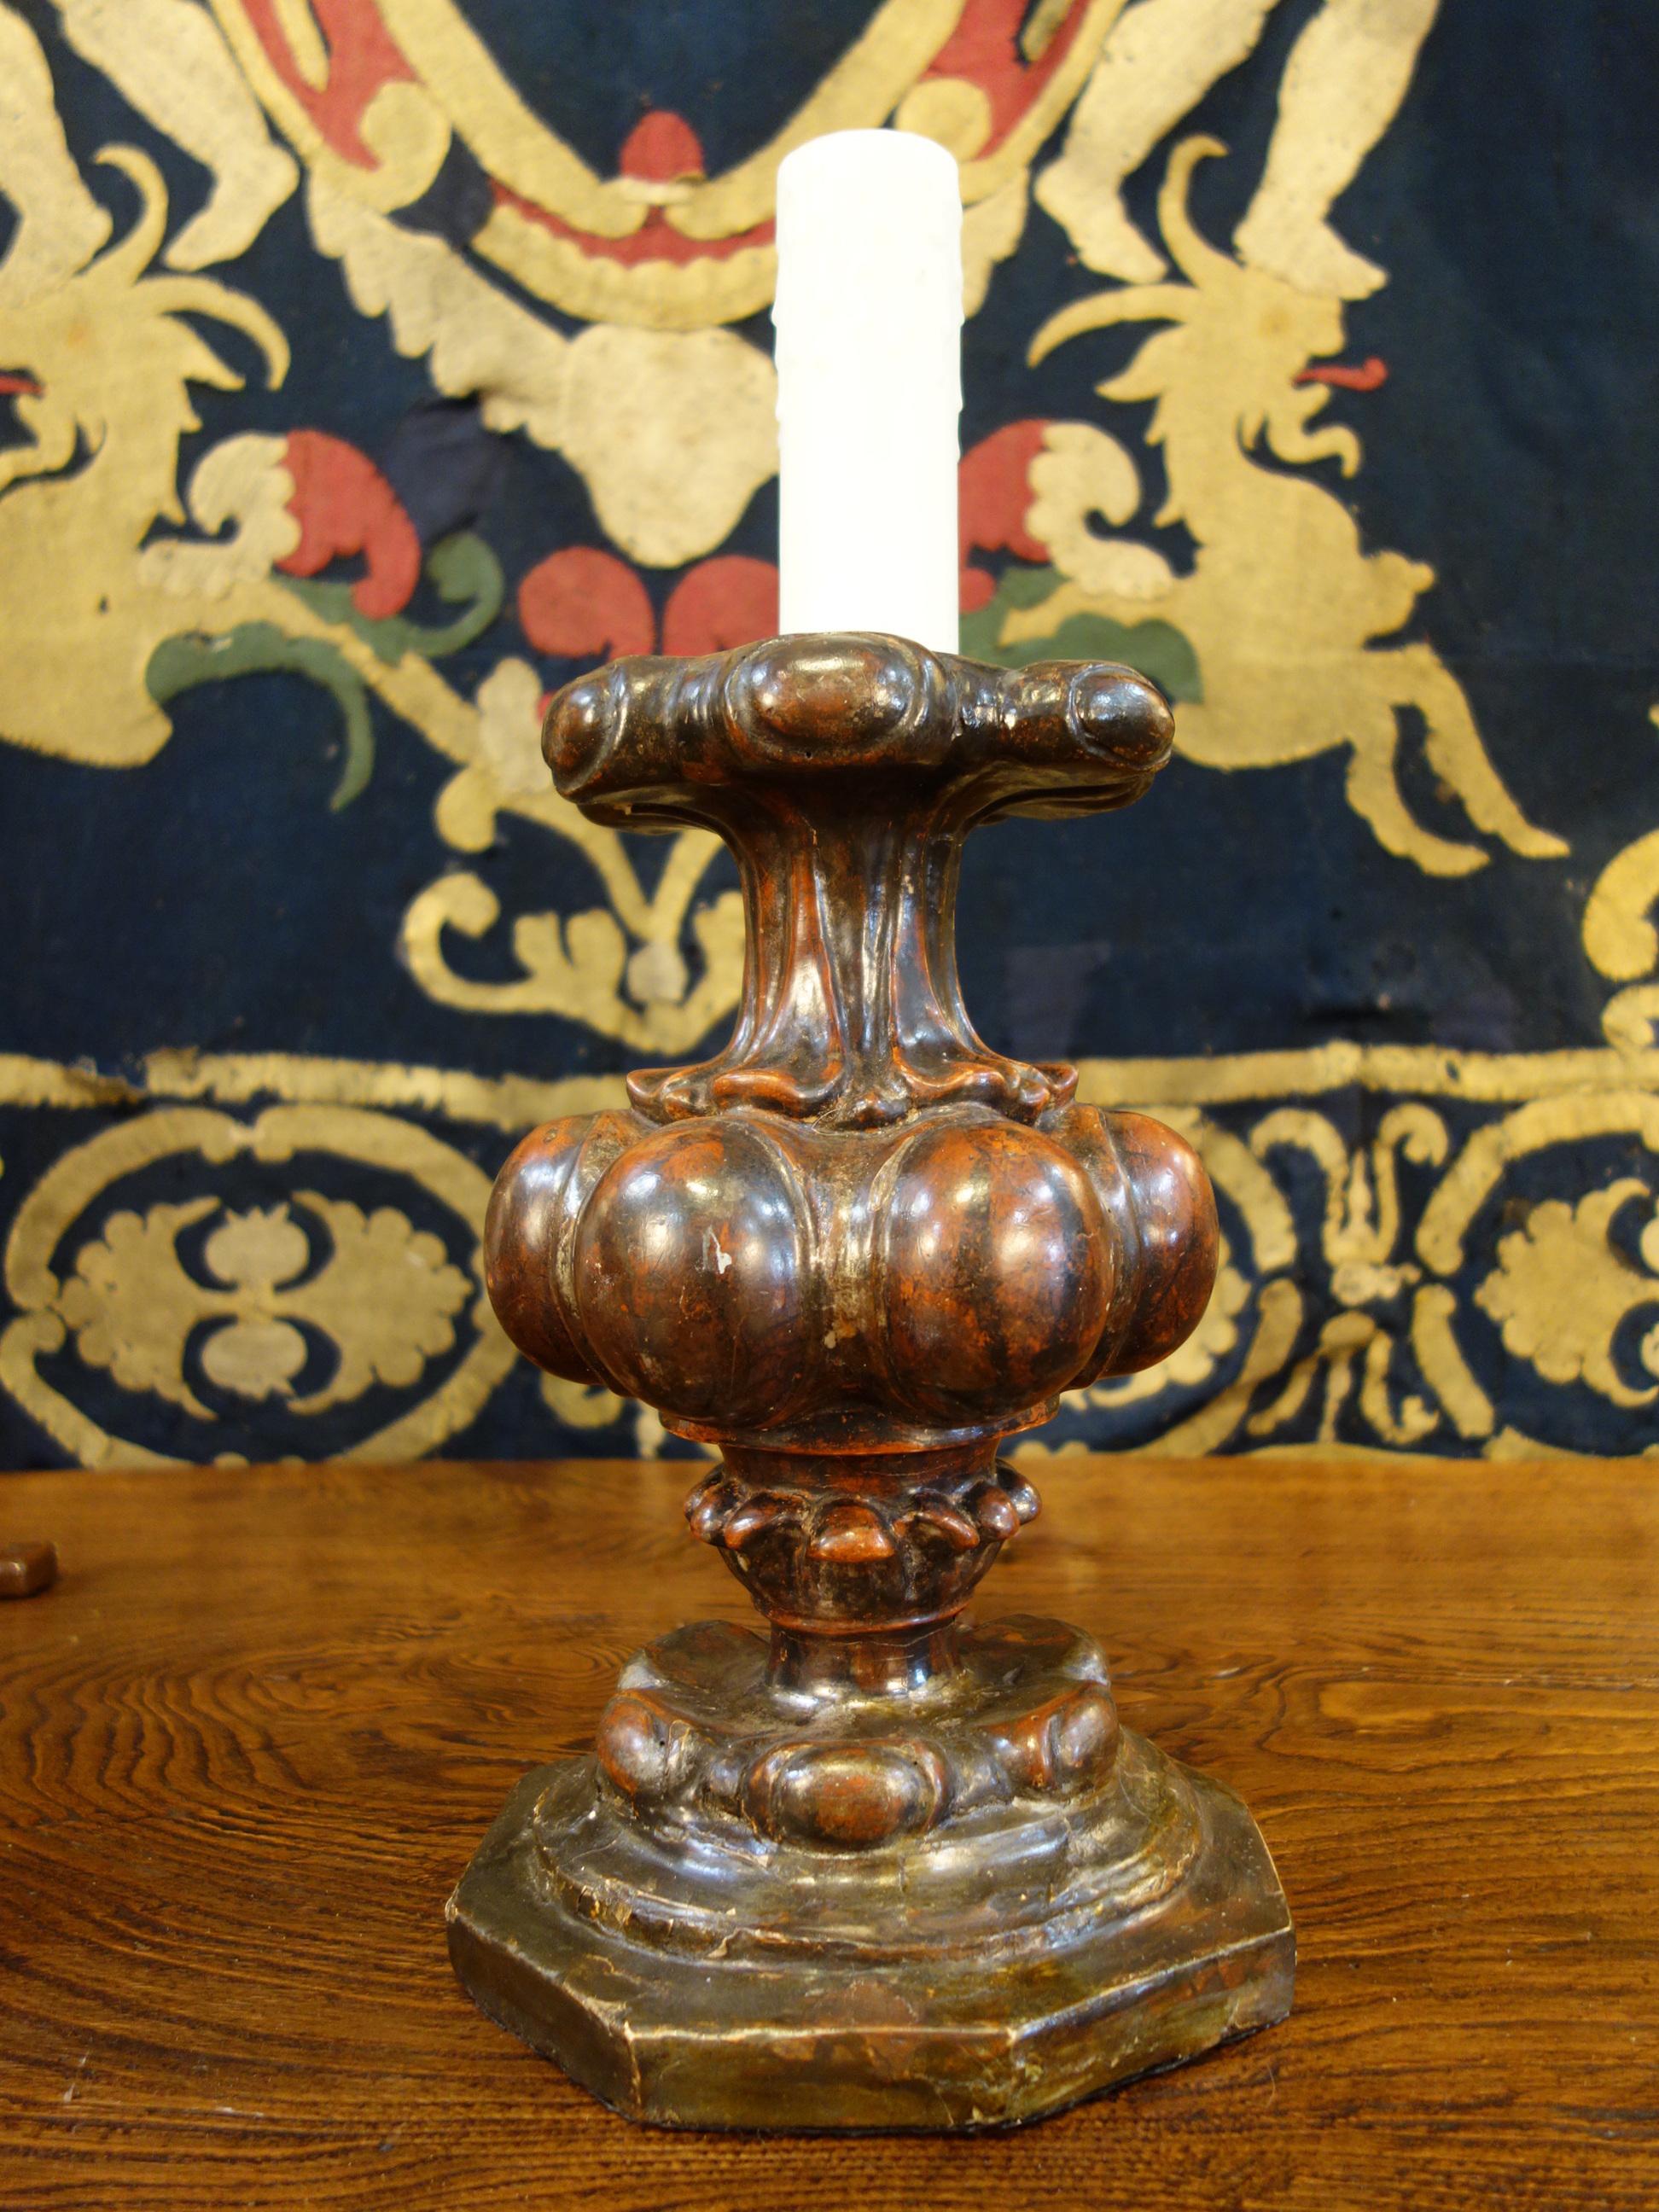 Late 17th century Baroque period, beautifully patinated pair of wood candelabra. Deep red hues created with bolo and silver leaf handcraft technique on plaster. Dramatic ovule gem shapes. Professionally UL re-wired for candelabra base bulbs, ready